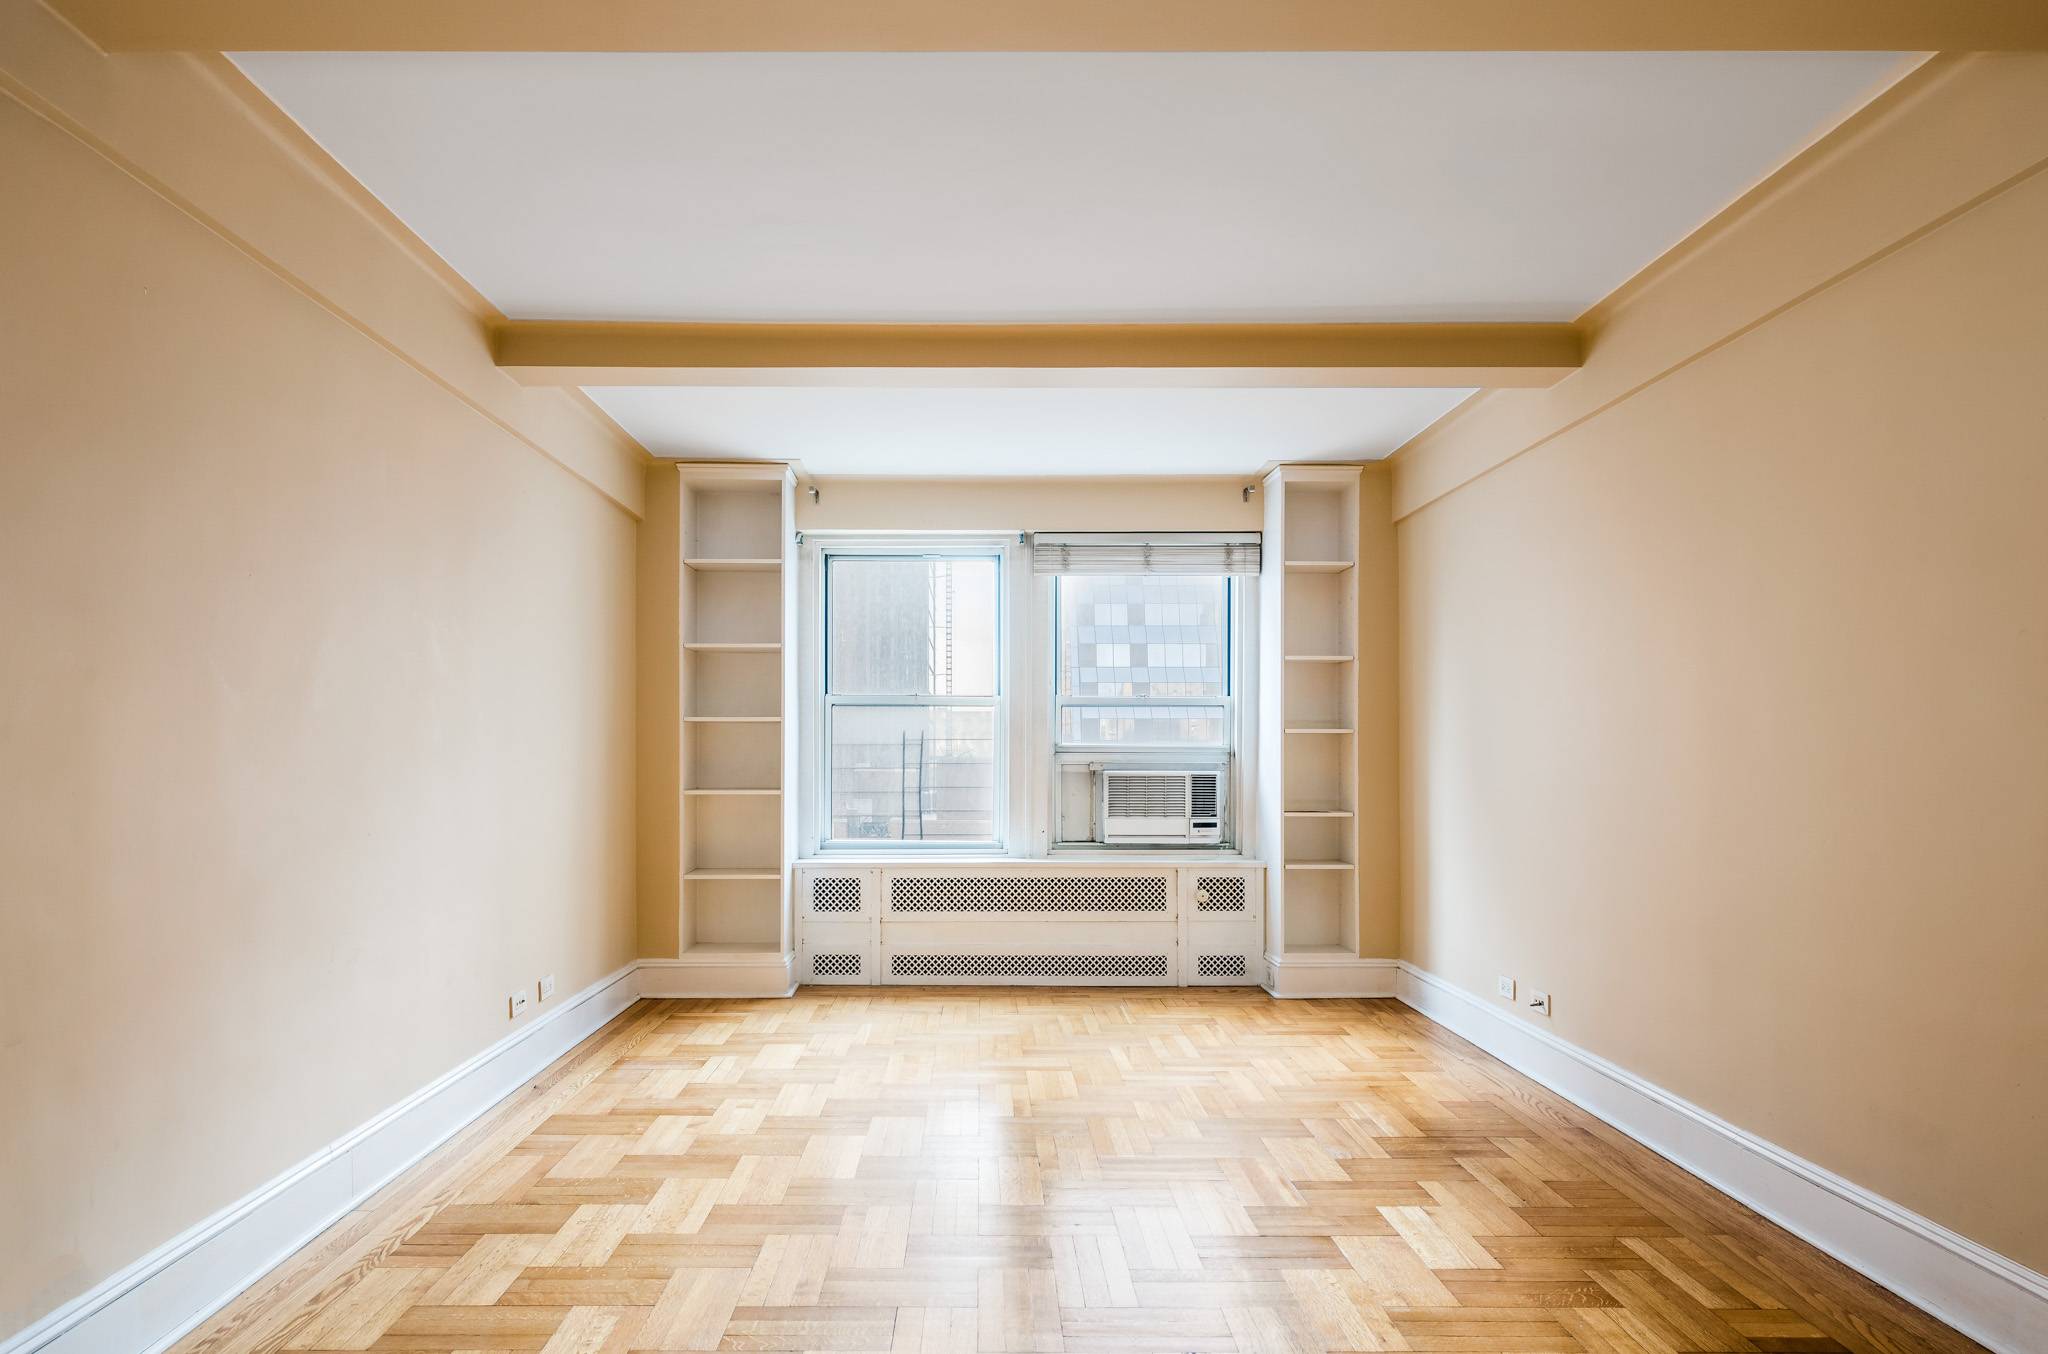 Fantastic opportunity to rent one of the largest one bedroom lines at 433 West 34th Street.